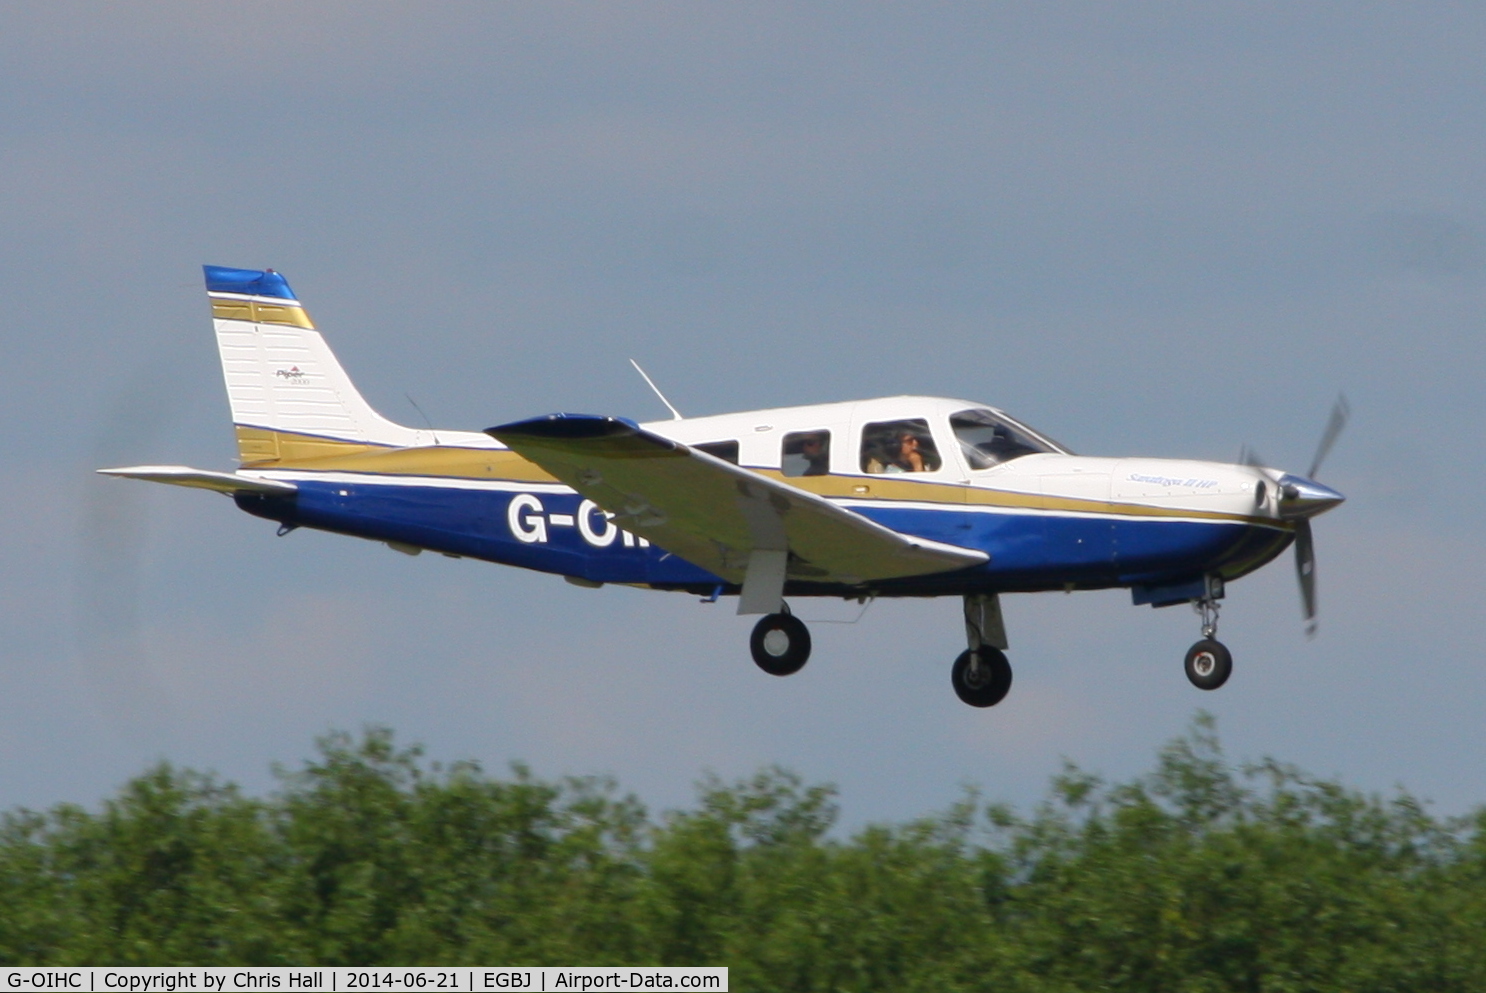 G-OIHC, 2000 Piper PA-32R-301 Saratoga II HP C/N 32-46163, Visitor for Project Propeller 2014